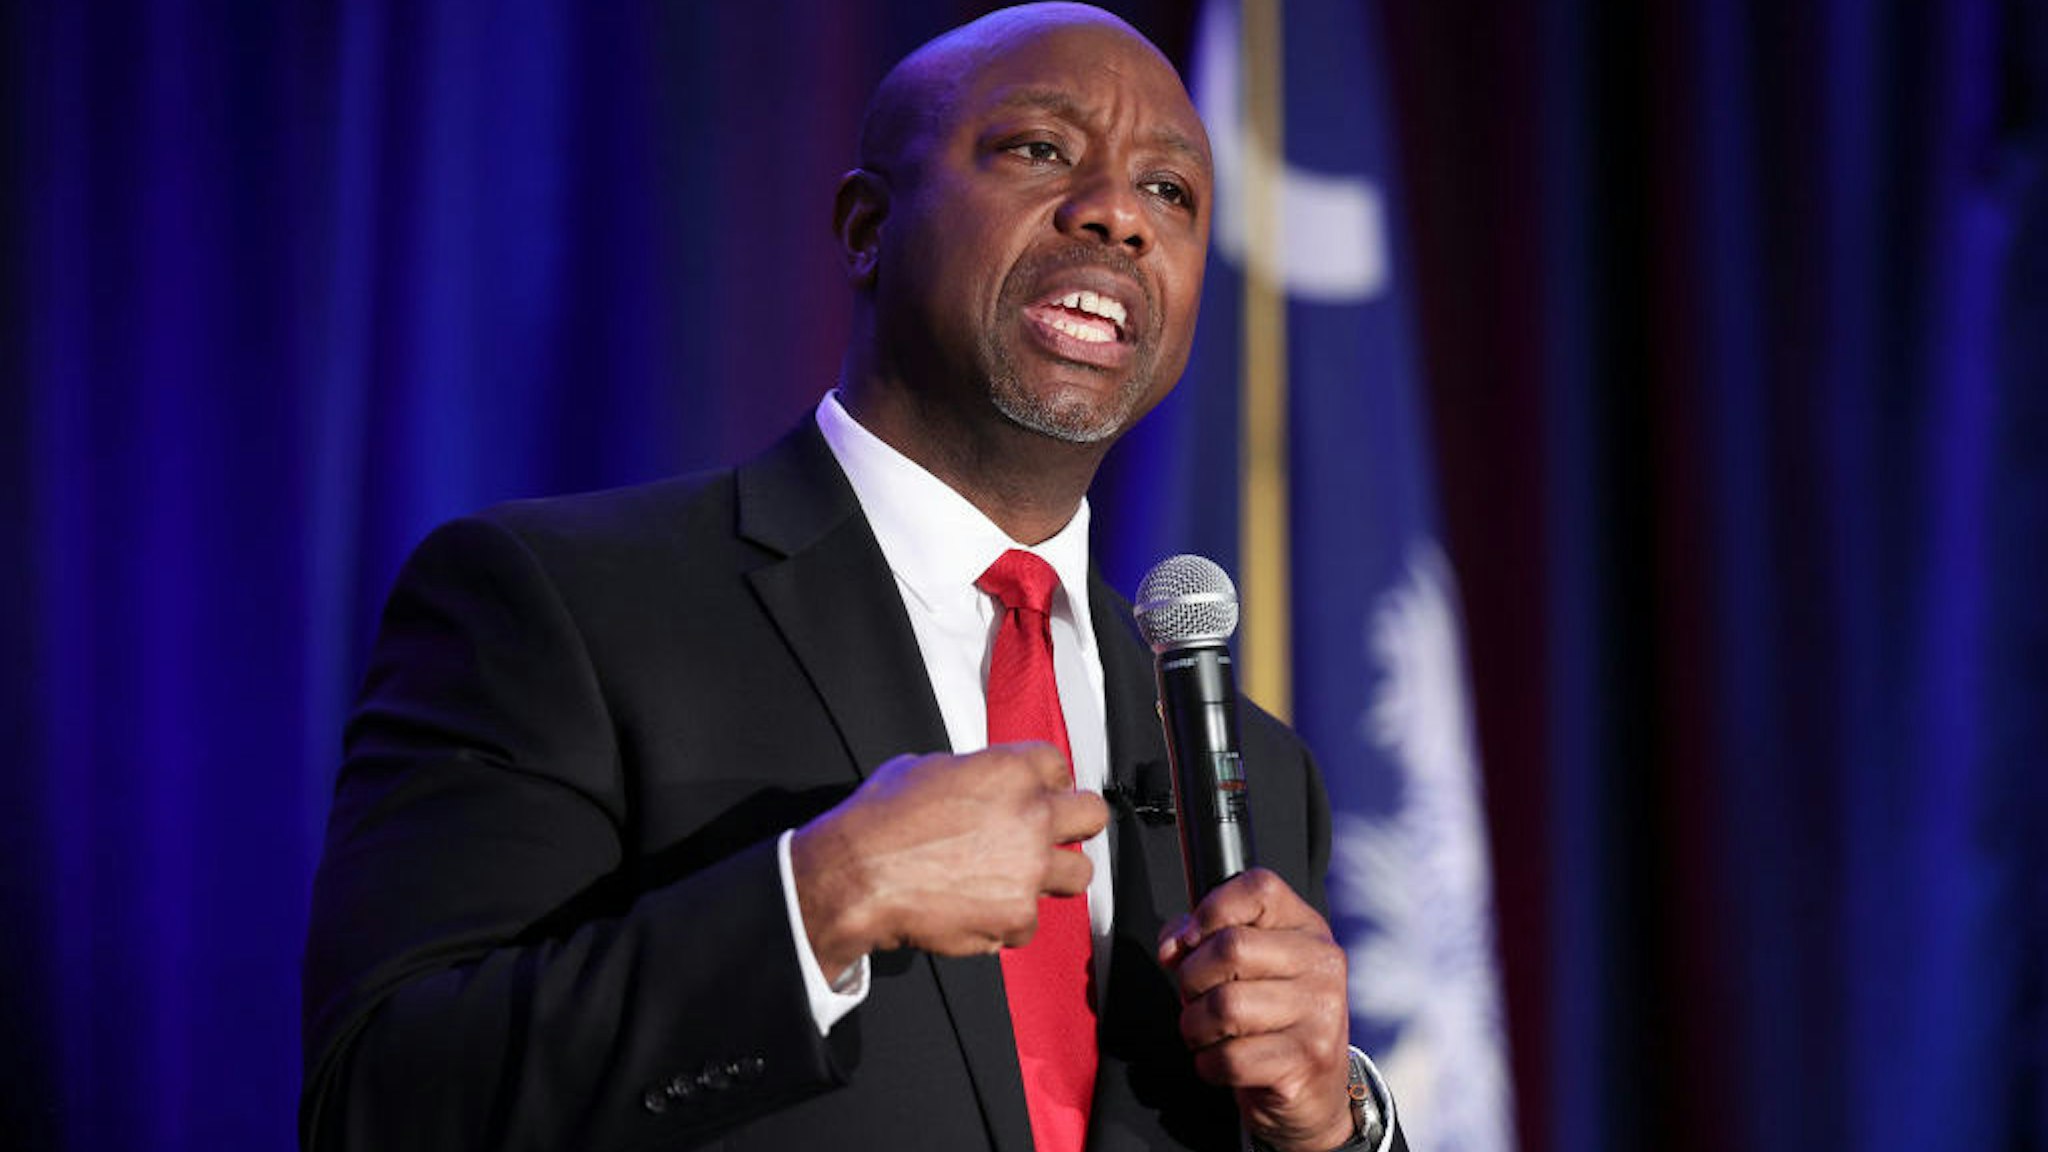 CHARLESTON, SOUTH CAROLINA - FEBRUARY 16: Sen. Tim Scott (R-SC) delivers remarks at the Charleston County Republican Party’s Black History Month Banquet February 16, 2023 in Charleston, South Carolina. Scott spoke about growing up in South Carolina during his remarks. (Photo by Win McNamee/Getty Images)